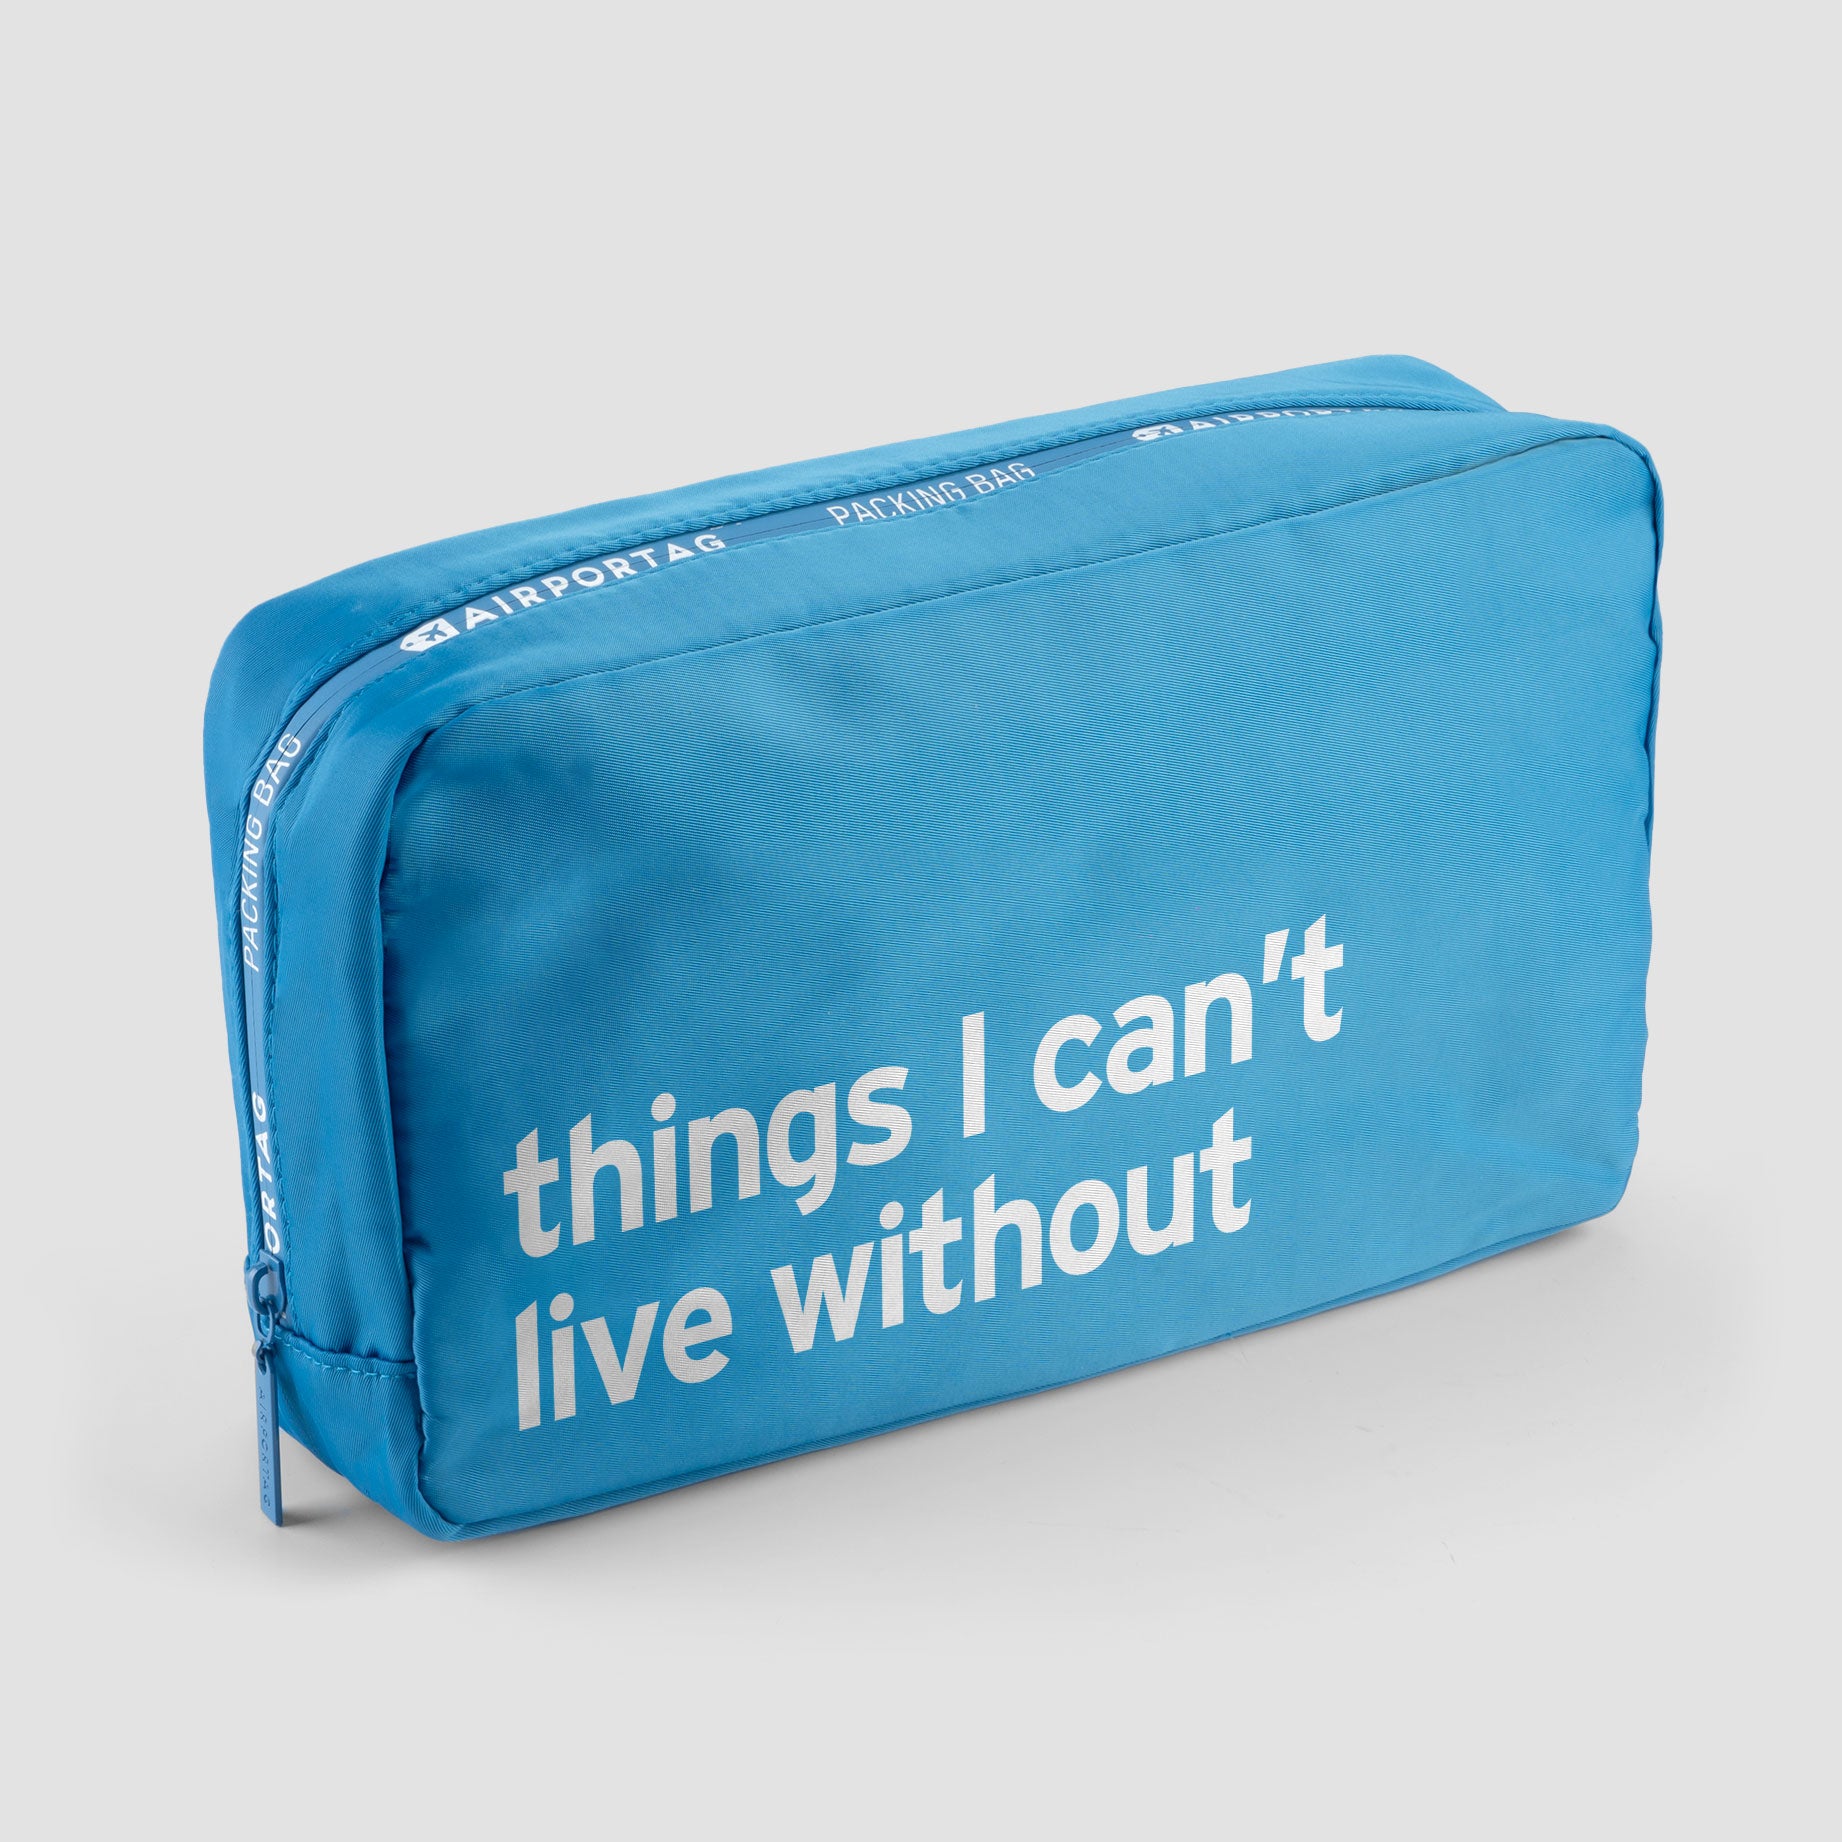 Things I can't live without - Packing Bag